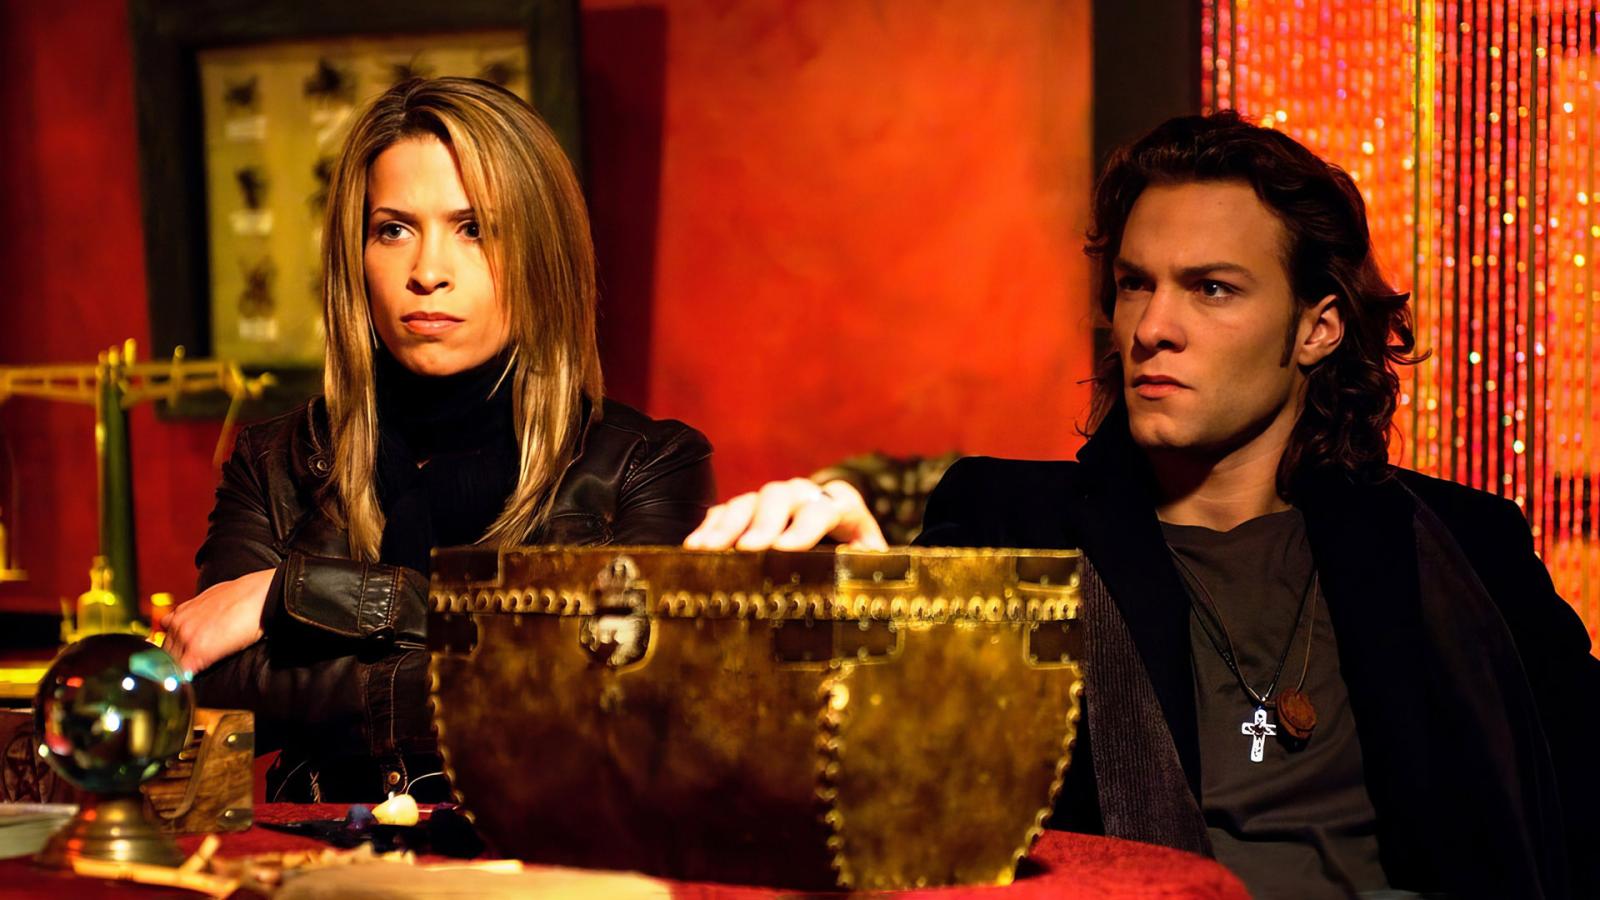 15 Lesser-Known TV Shows to Watch If You Miss Vampire Diaries - image 4